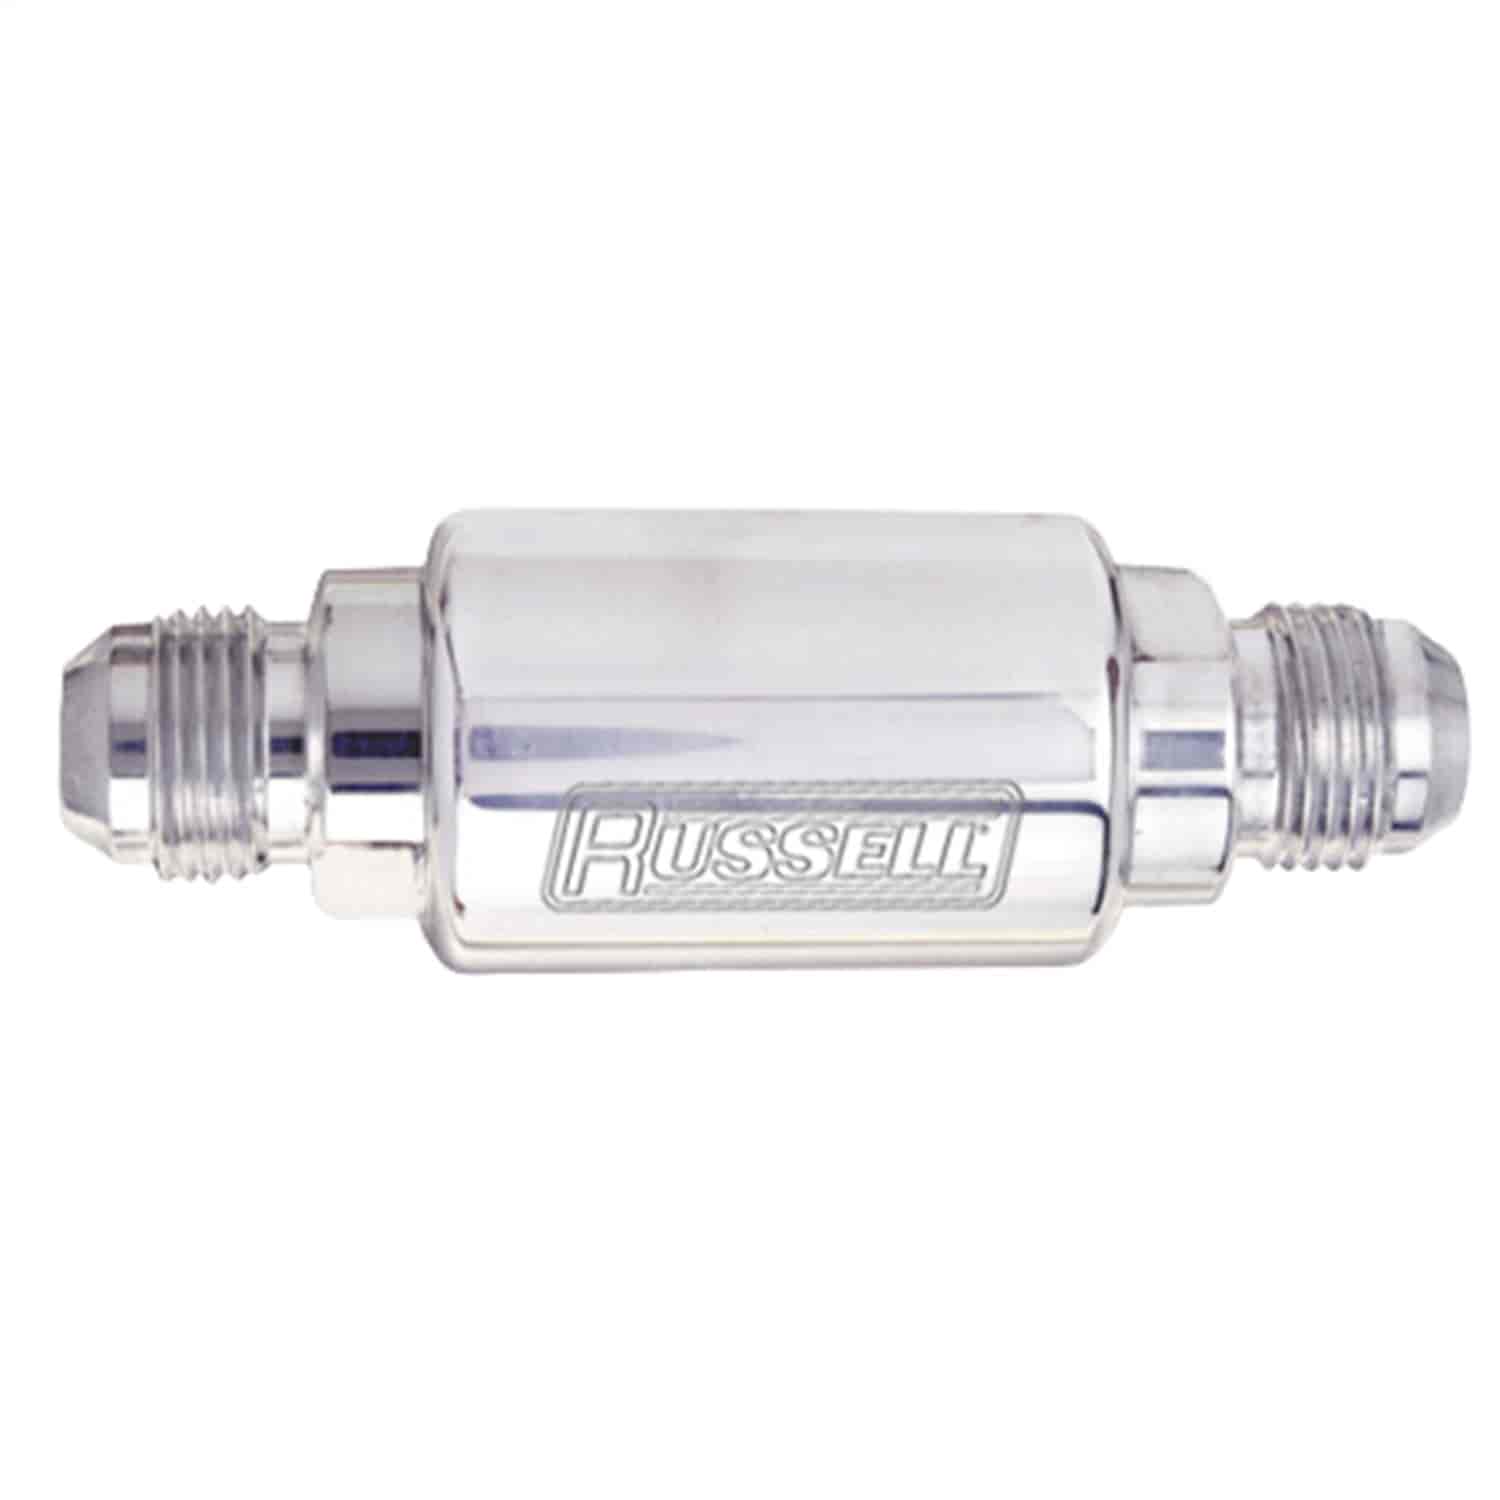 Competition Fuel Filter -06 AN Male Inlet / 3/8" NPT Male Outlet